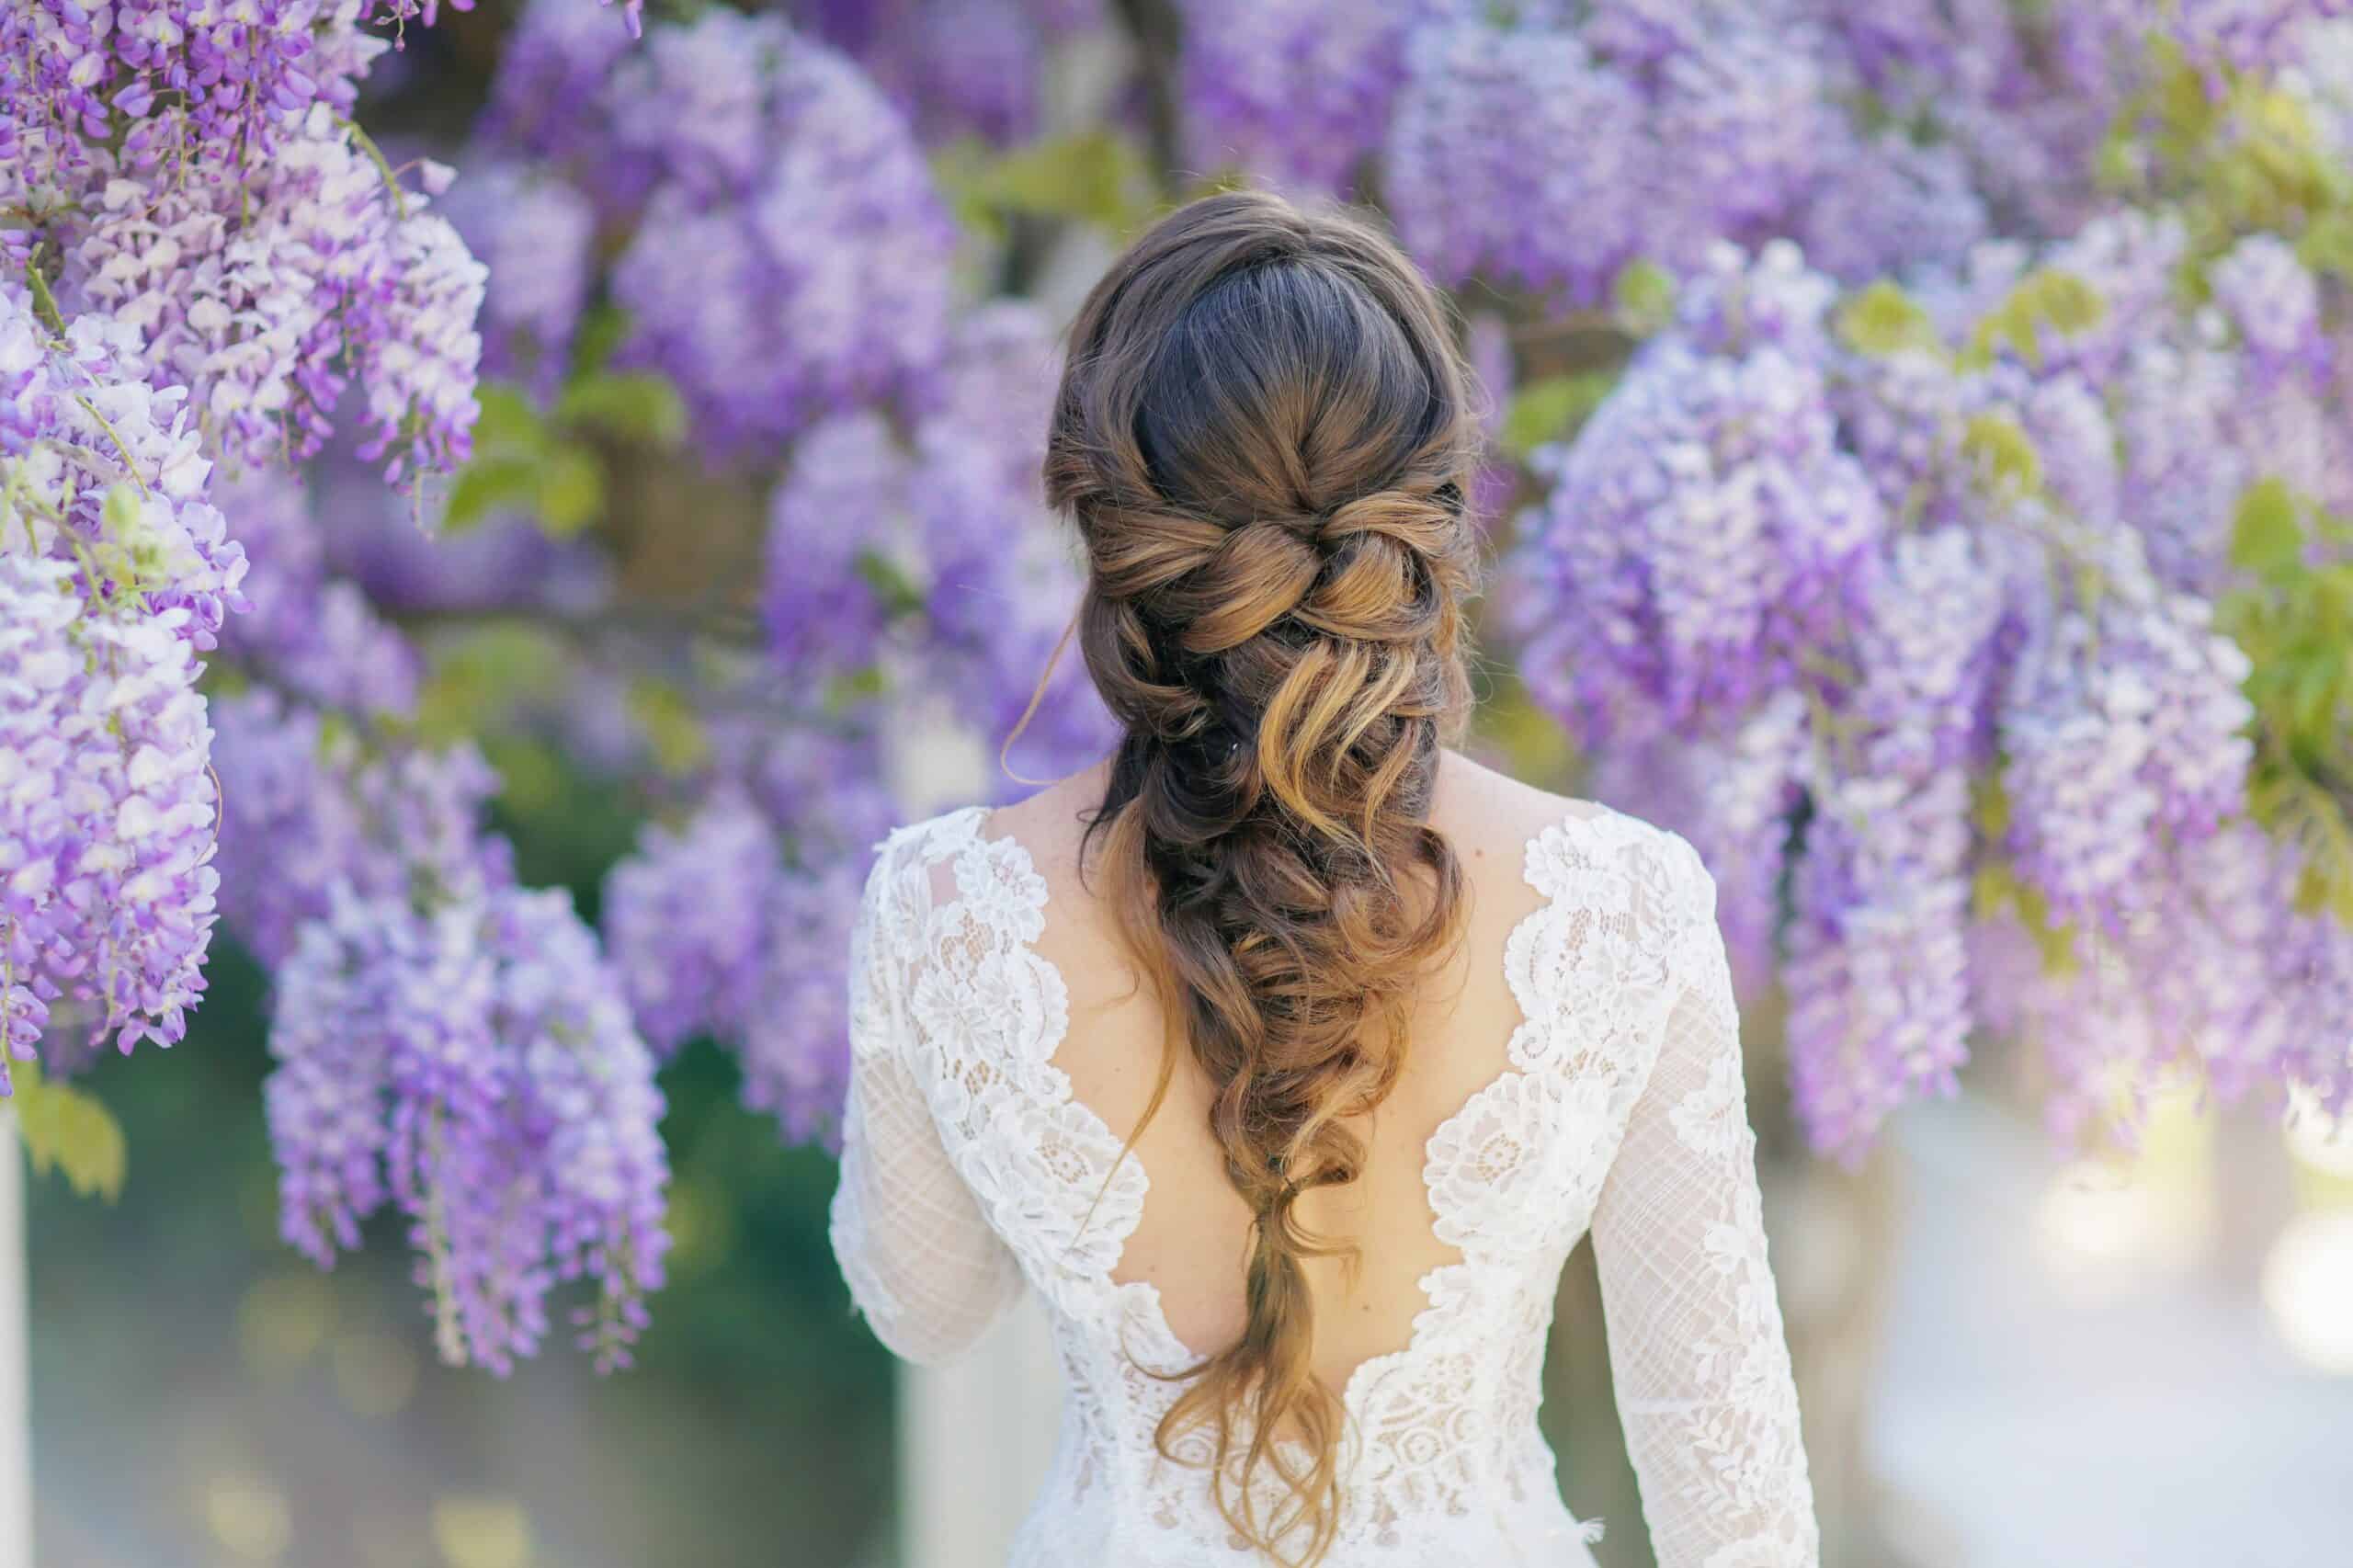 Best braided looks for brides